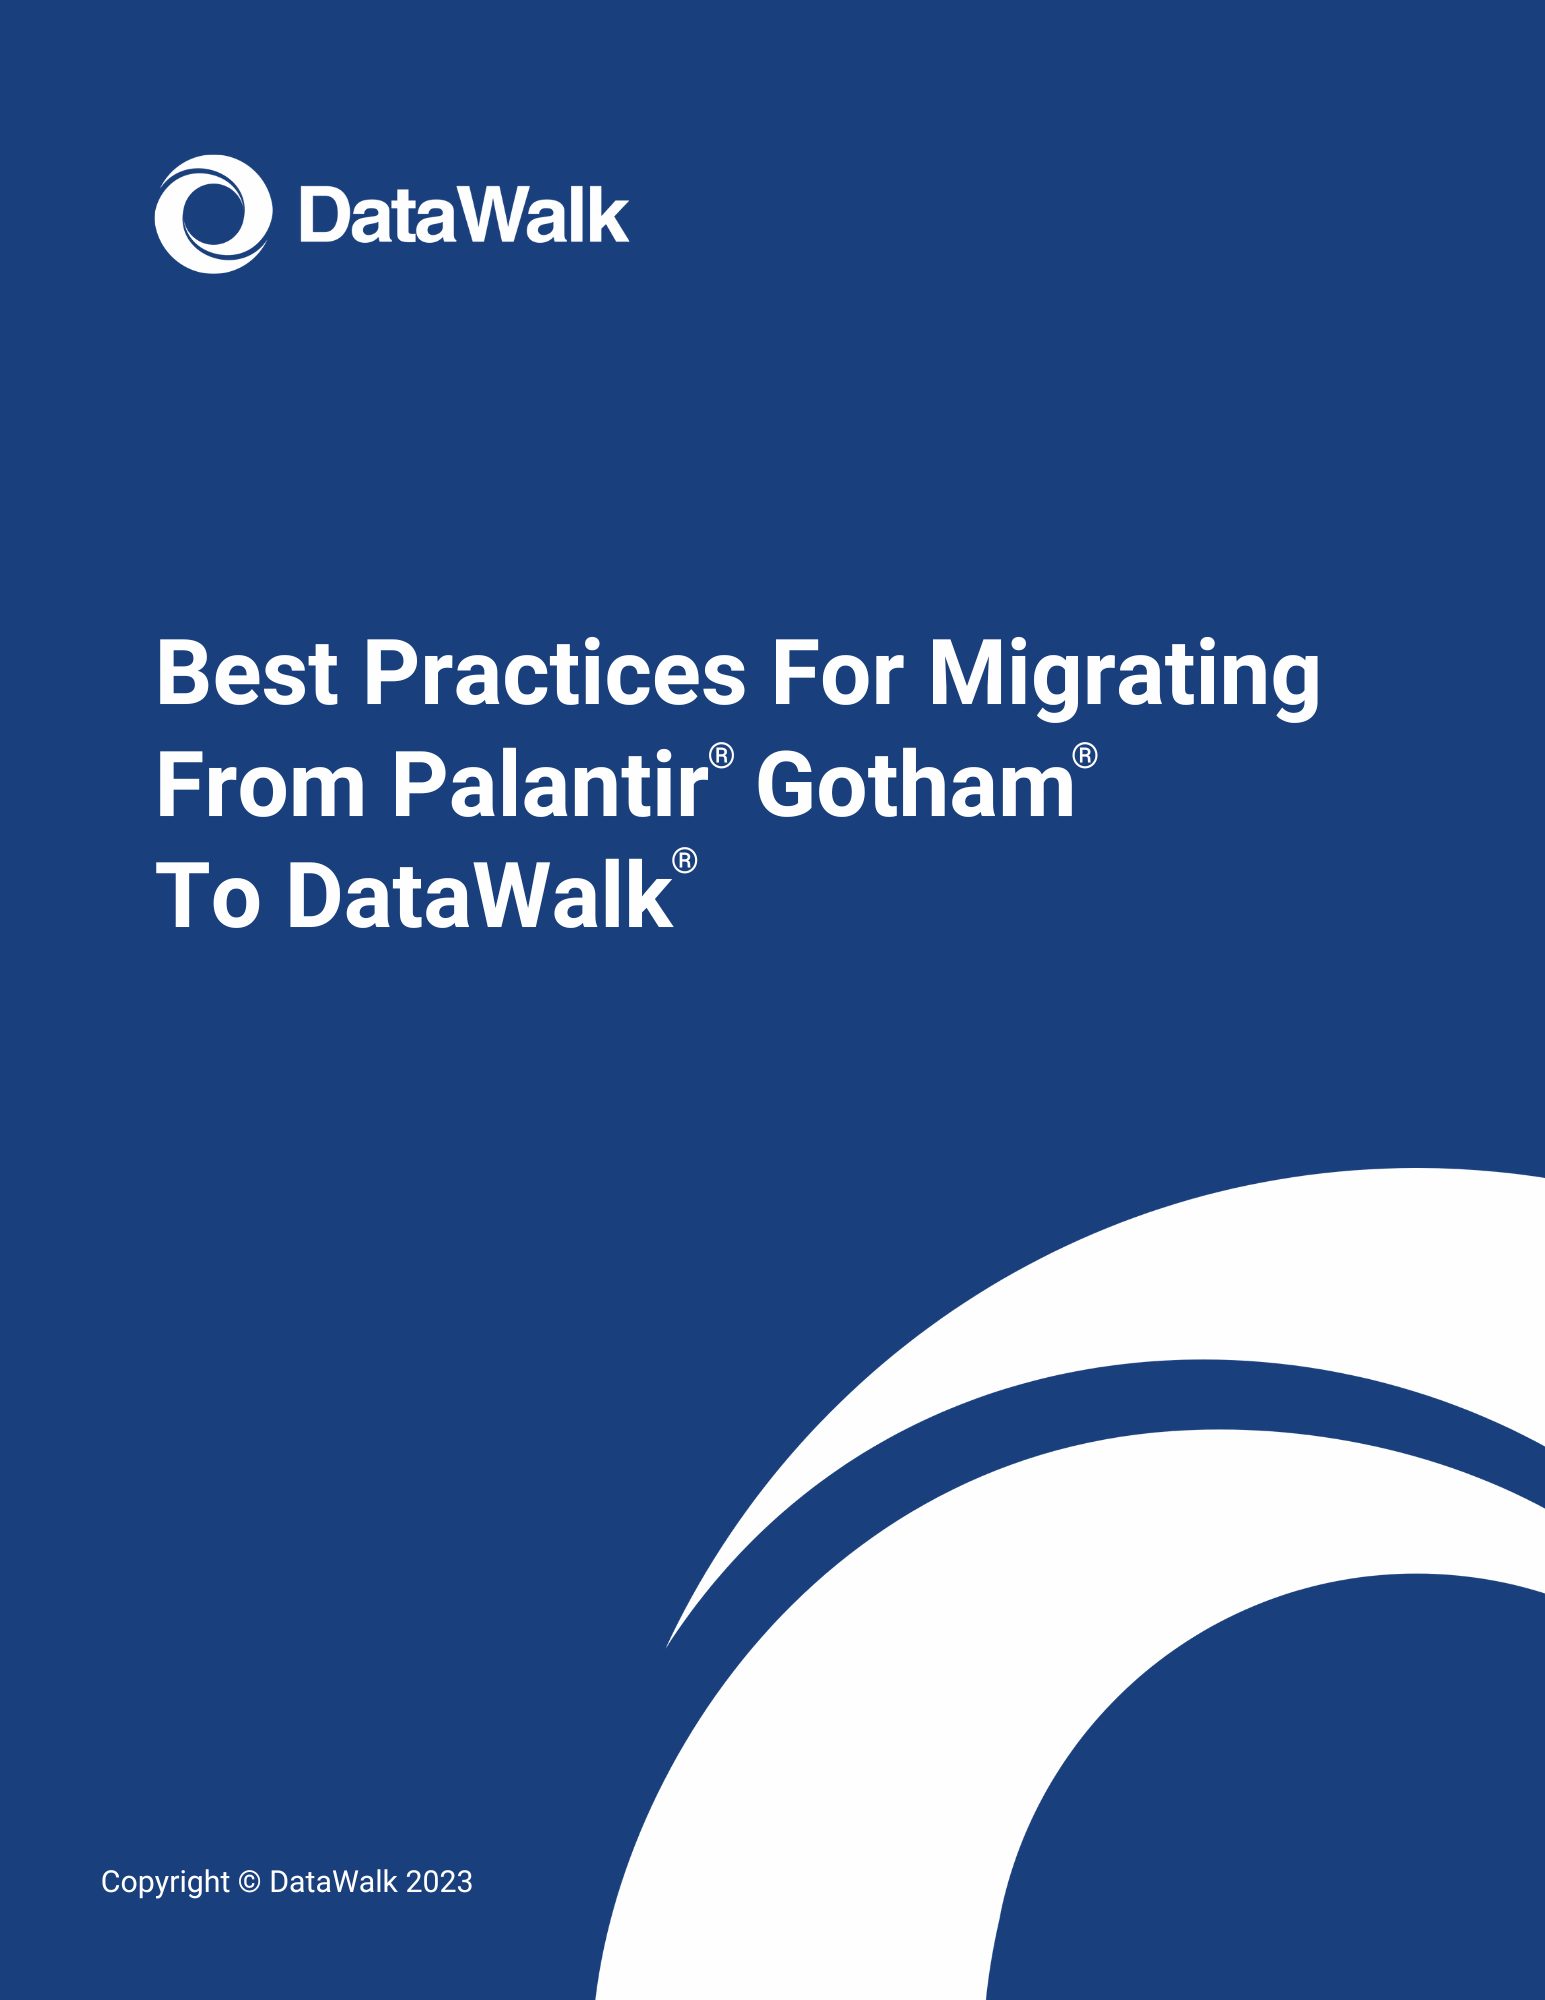 Best Practices For Migrating From Palantir Gotham To DataWalk